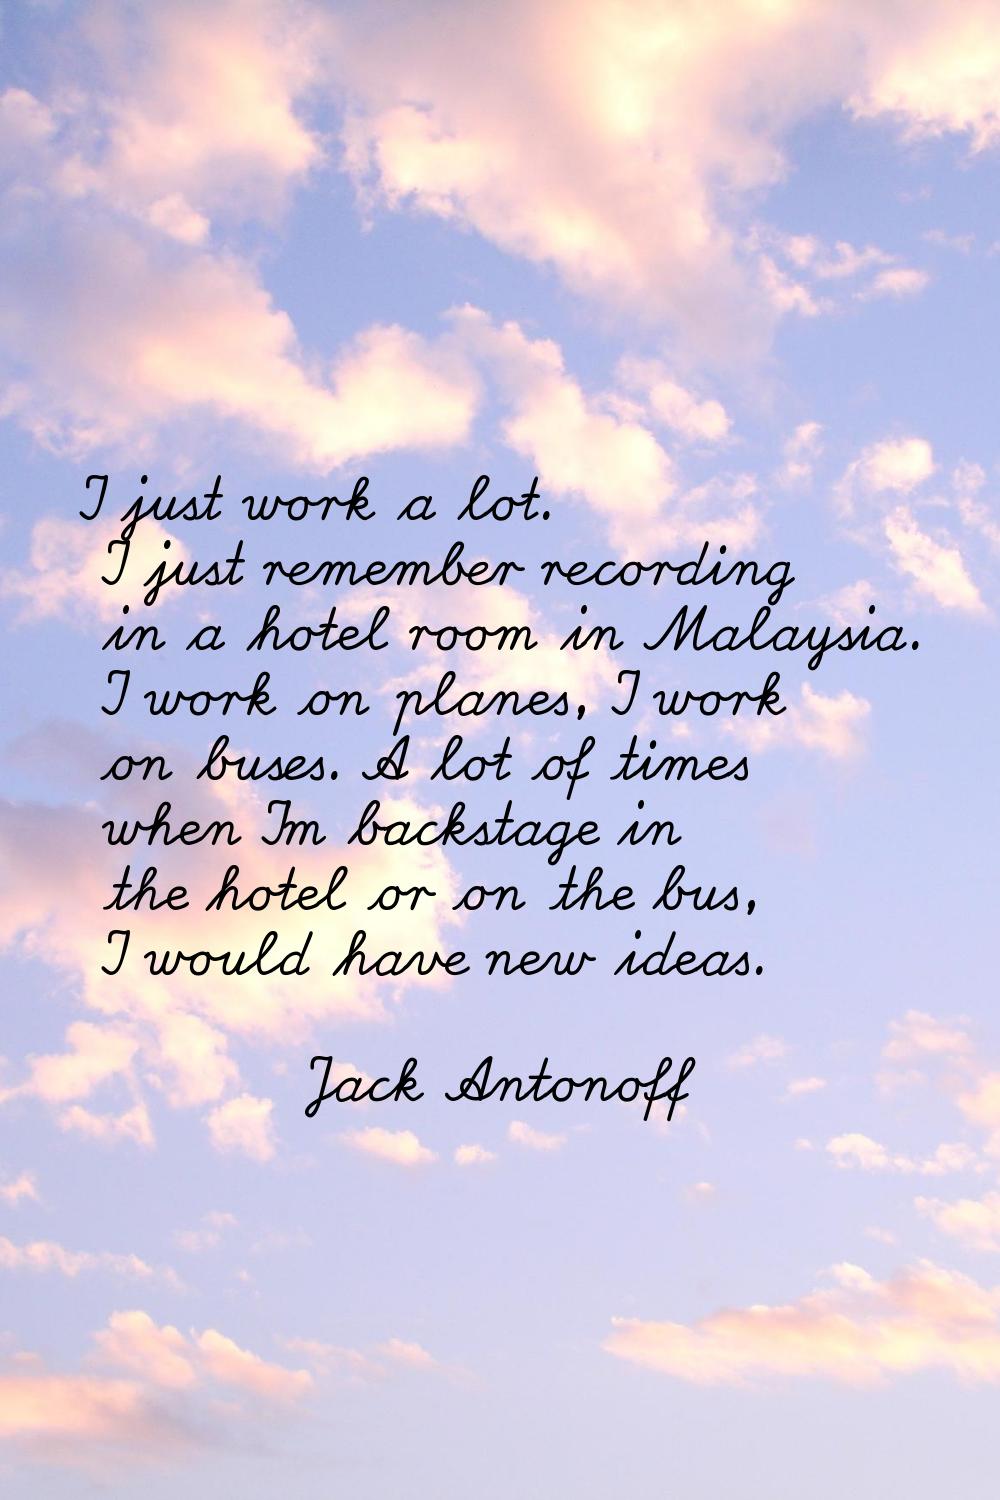 I just work a lot. I just remember recording in a hotel room in Malaysia. I work on planes, I work 